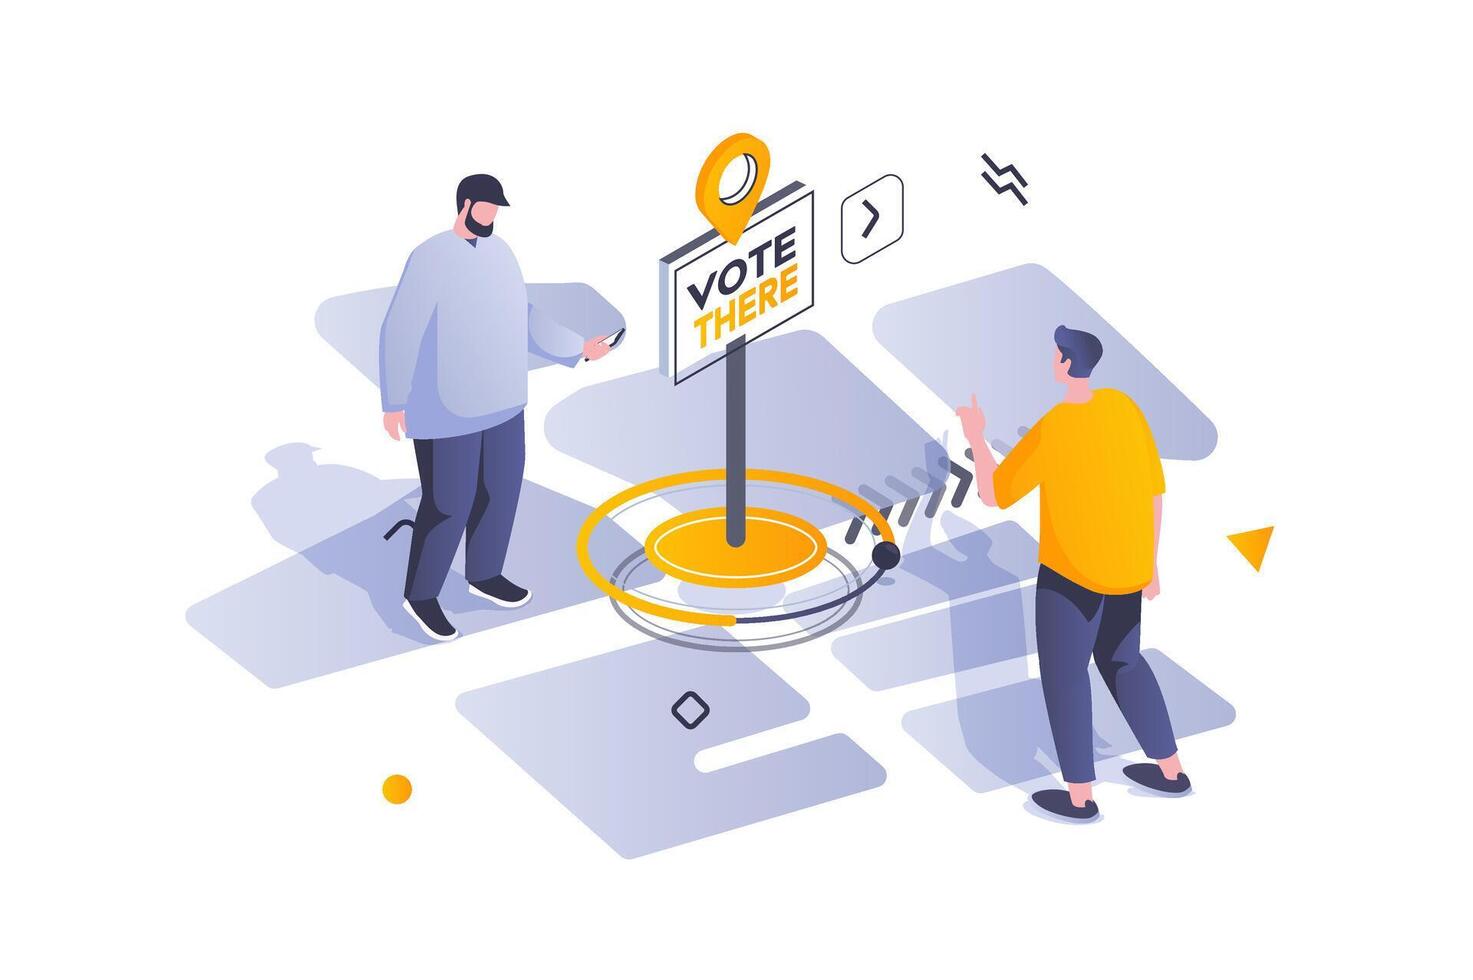 Election and voting concept in 3d isometric design. Men voters go to polls to participate in democratic election or referendum survey. Vector illustration with isometric people scene for web graphic